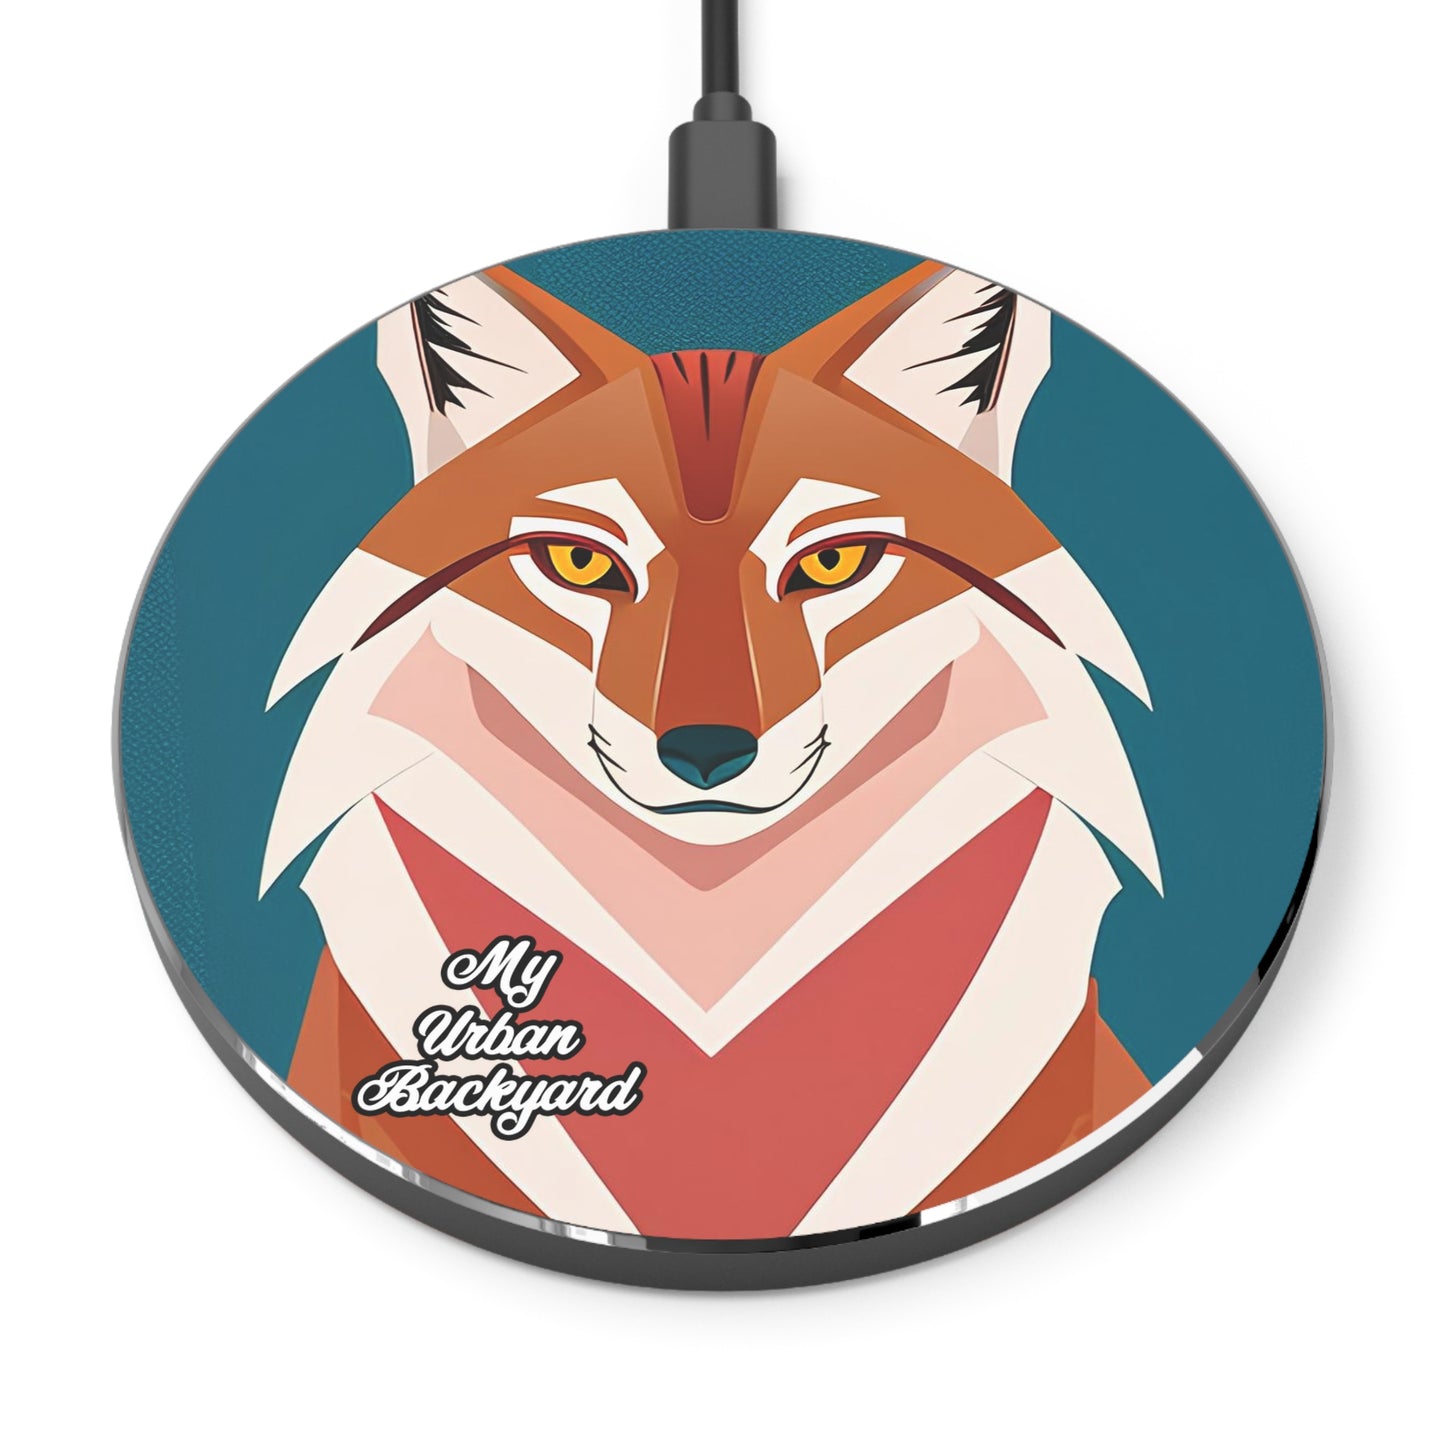 Chica Coyote, 10W Wireless Charger for iPhone, Android, Earbuds